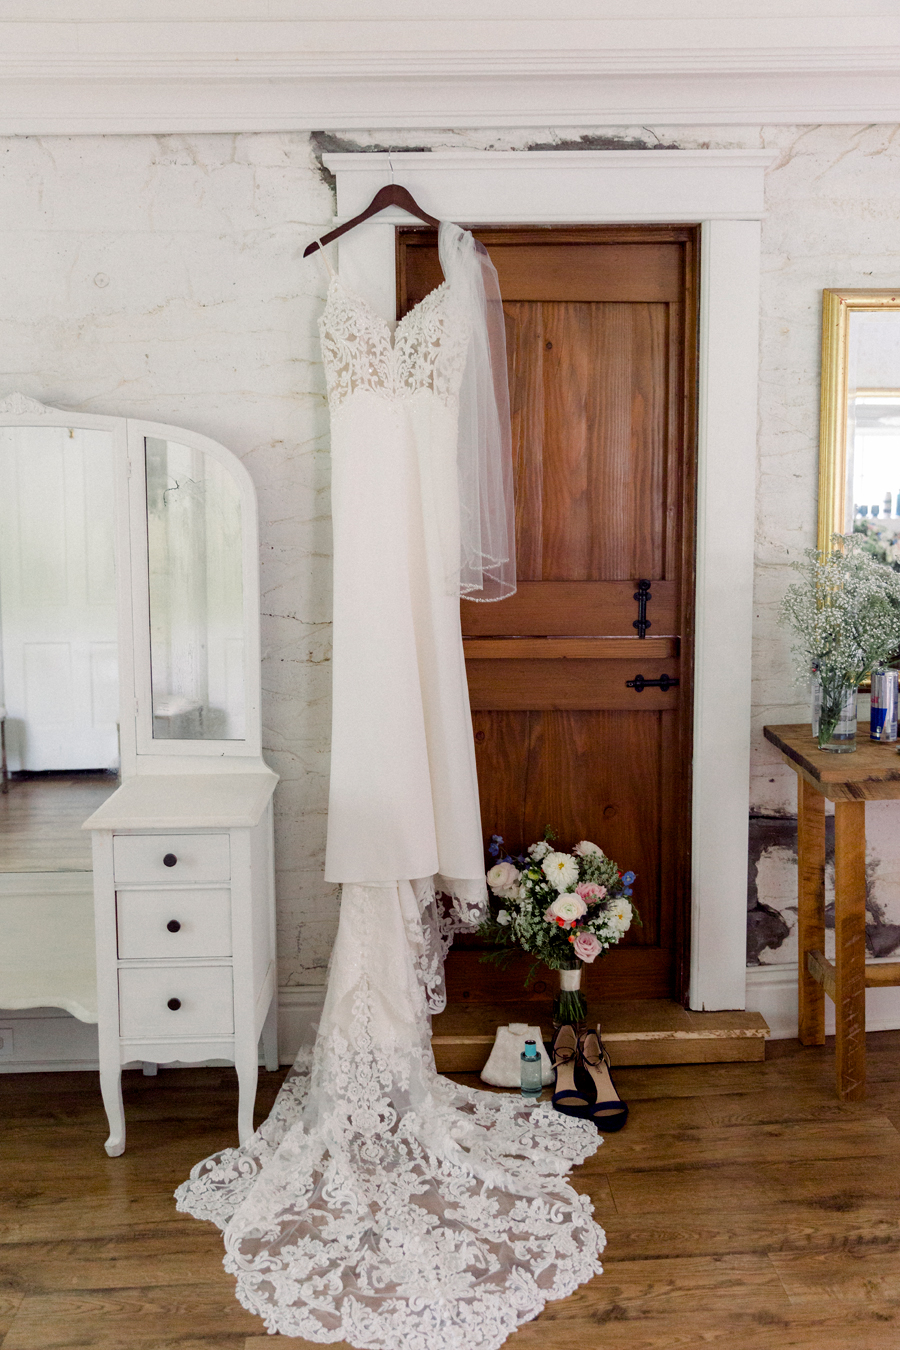 The bride's dress hangs on the doorframe in the cottage at Wildcliff Weddings and Events.